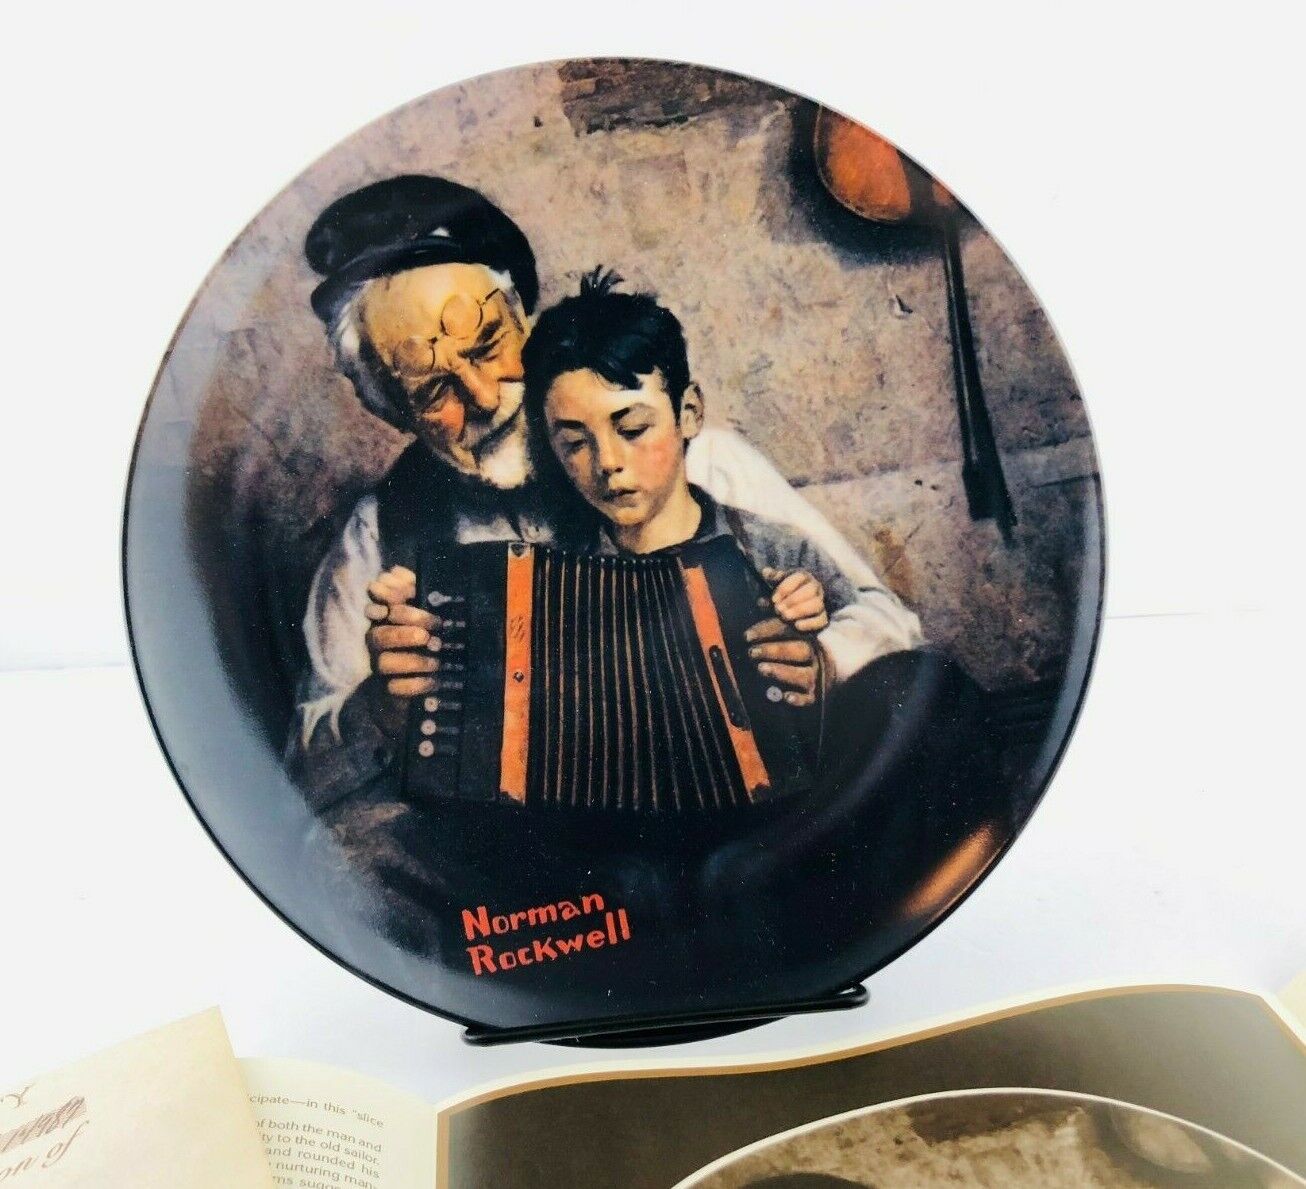 Norman Rockwell Plate Vintage Knowles The Music Maker Rockwell Original 1981